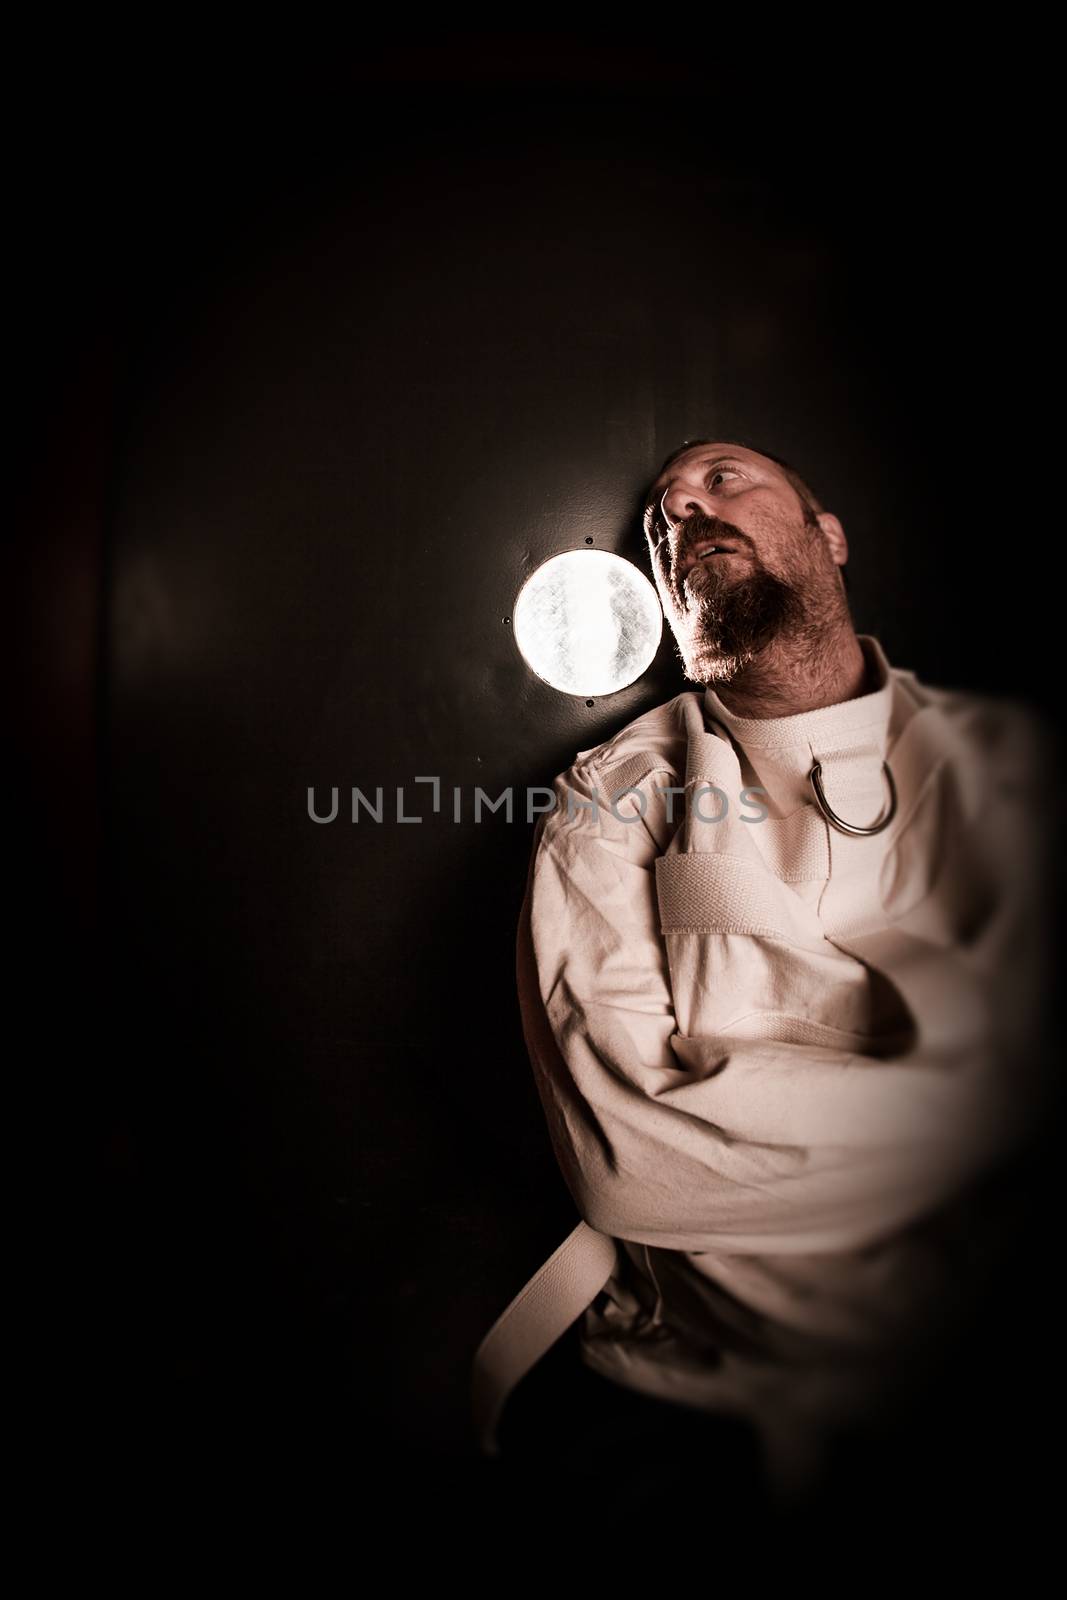 Photo of an insane man in his forties wearing a straitjacket standing in a cell of an asylum with the light from the hallway streaming in.